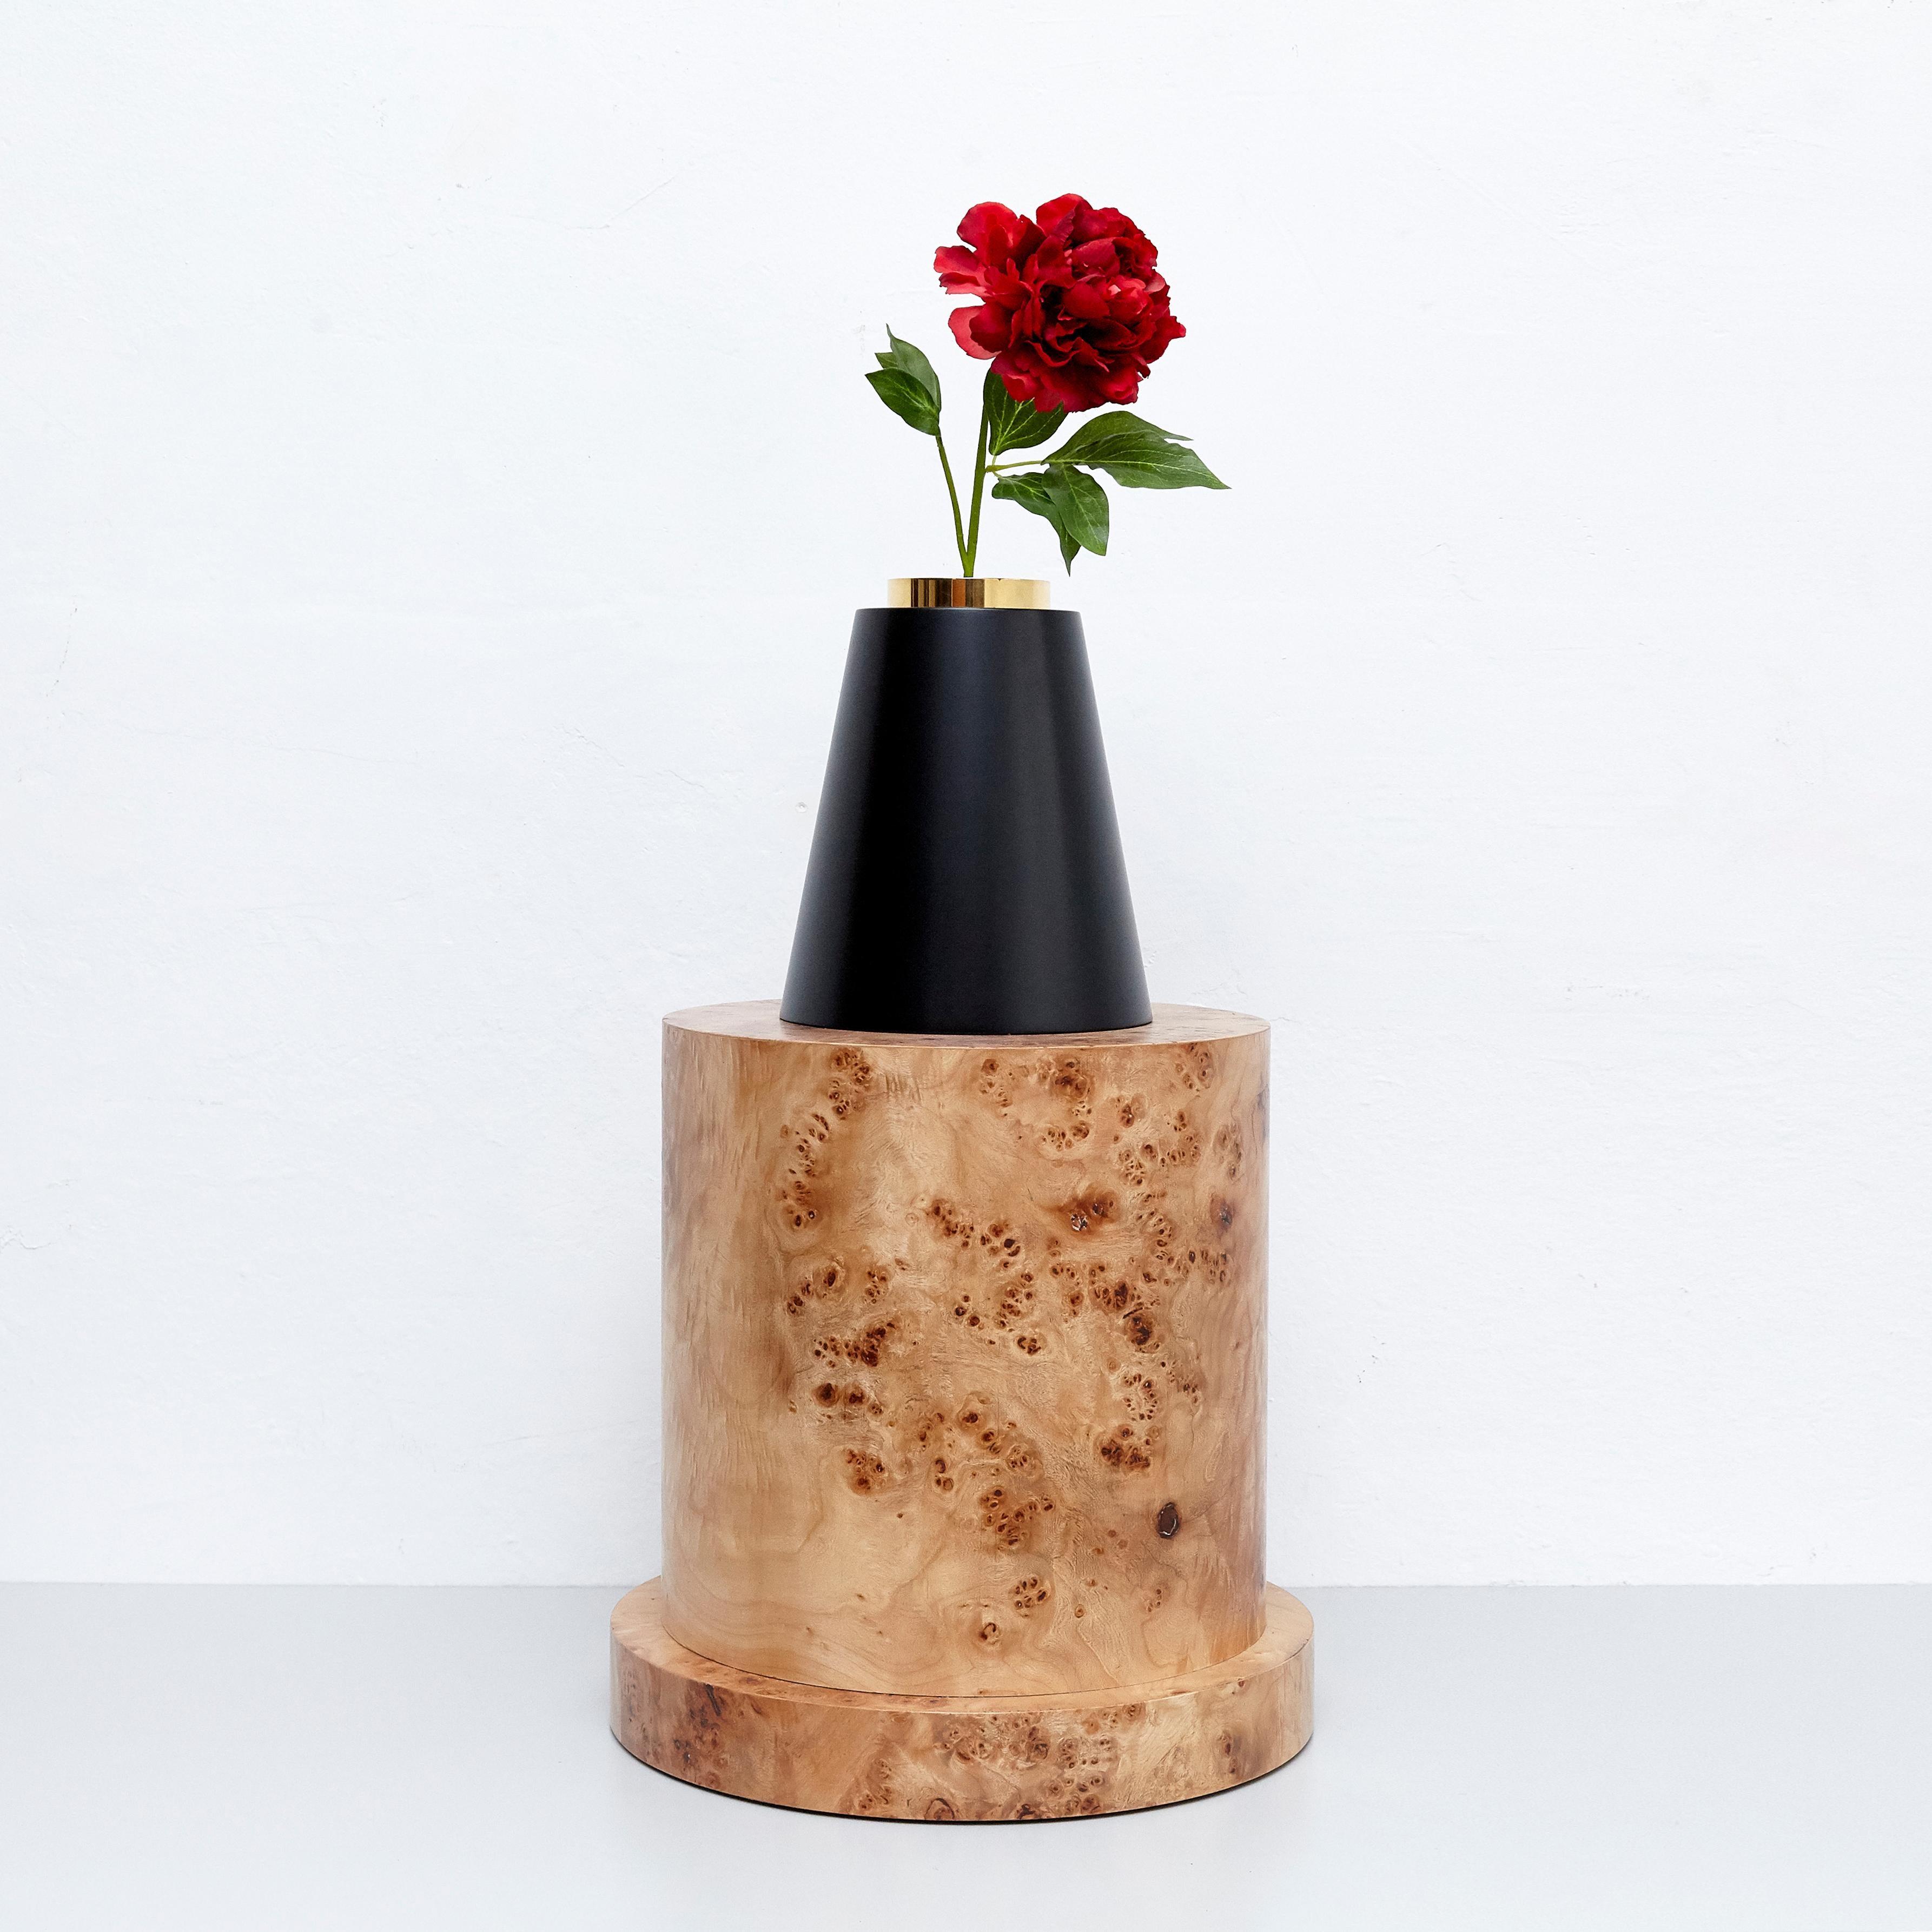 European Ettore Sottsass I Limited Edition Vase in Wood and Murano Glass for Flowers